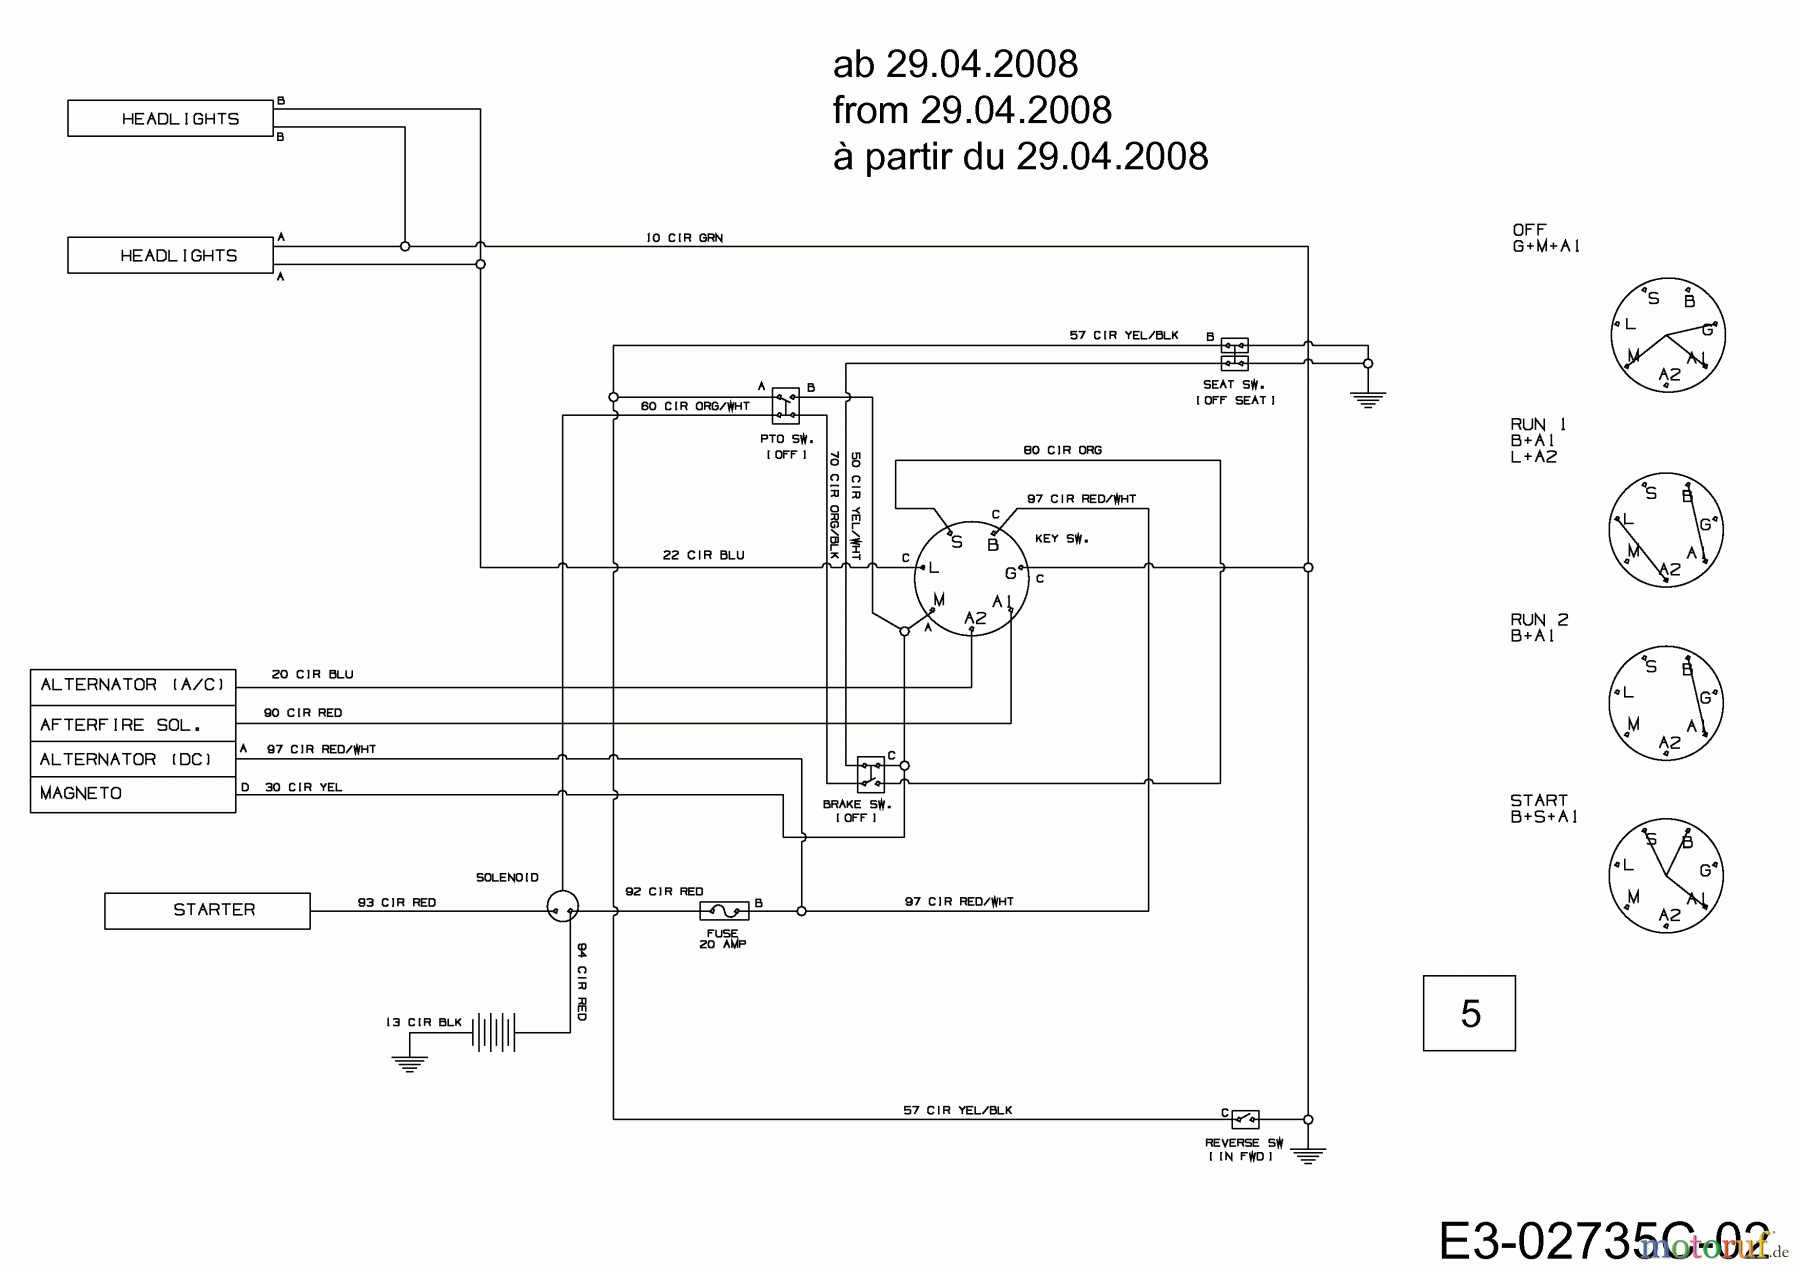  Oleo-Mac Lawn tractors Polo 95/11.5 T 13AH762F436  (2008) Wiring diagram from 29.04.2008